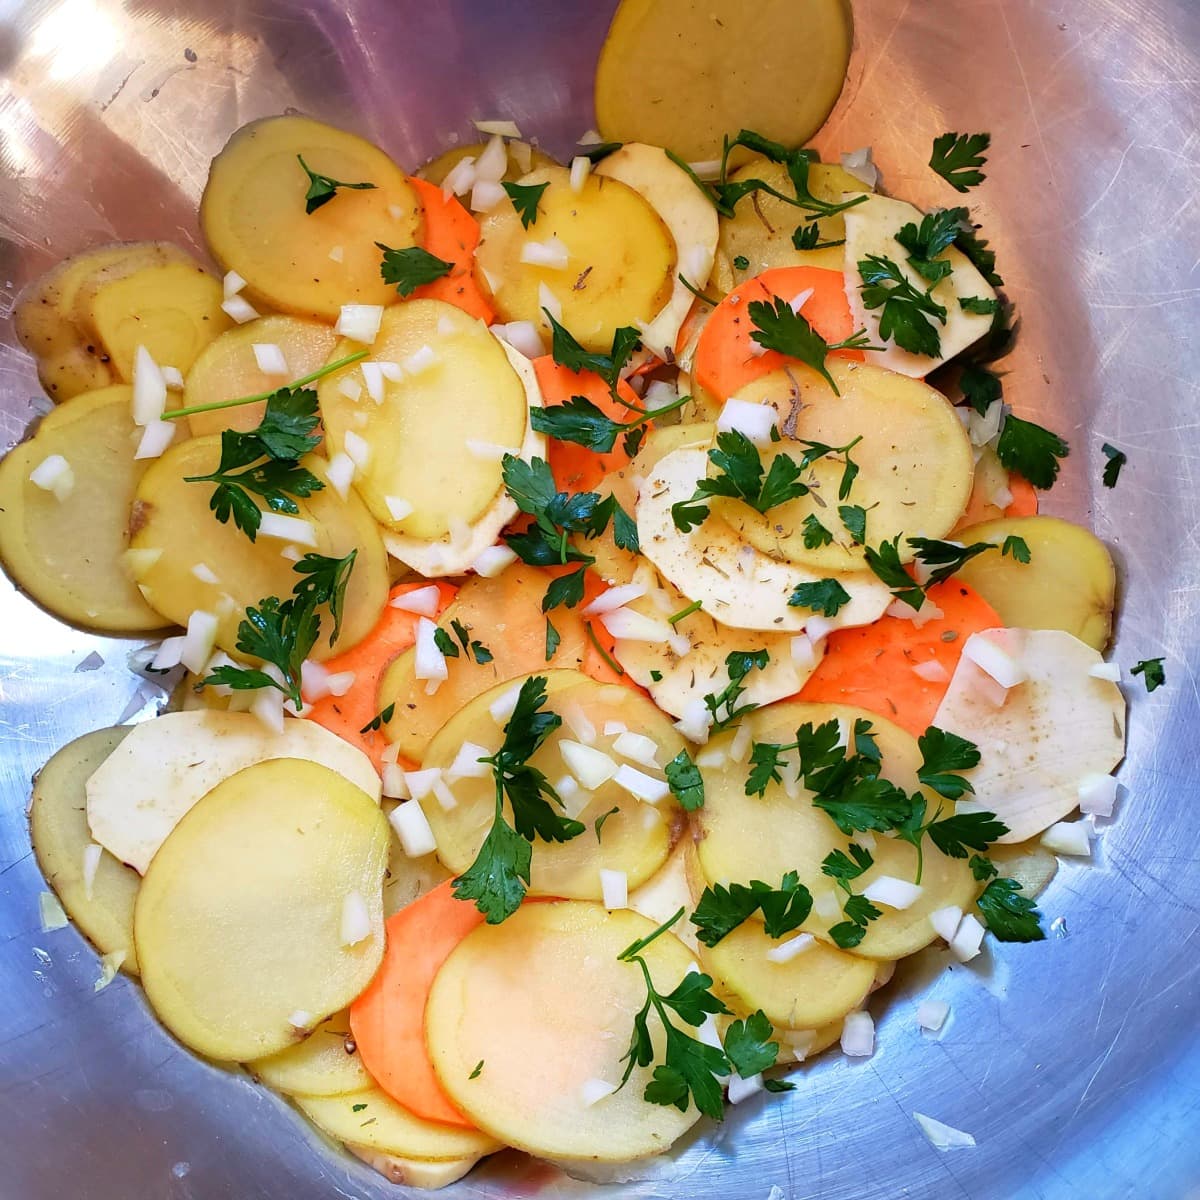 Potatoes layeres in a big mixing bowl with fresh parsley and onions